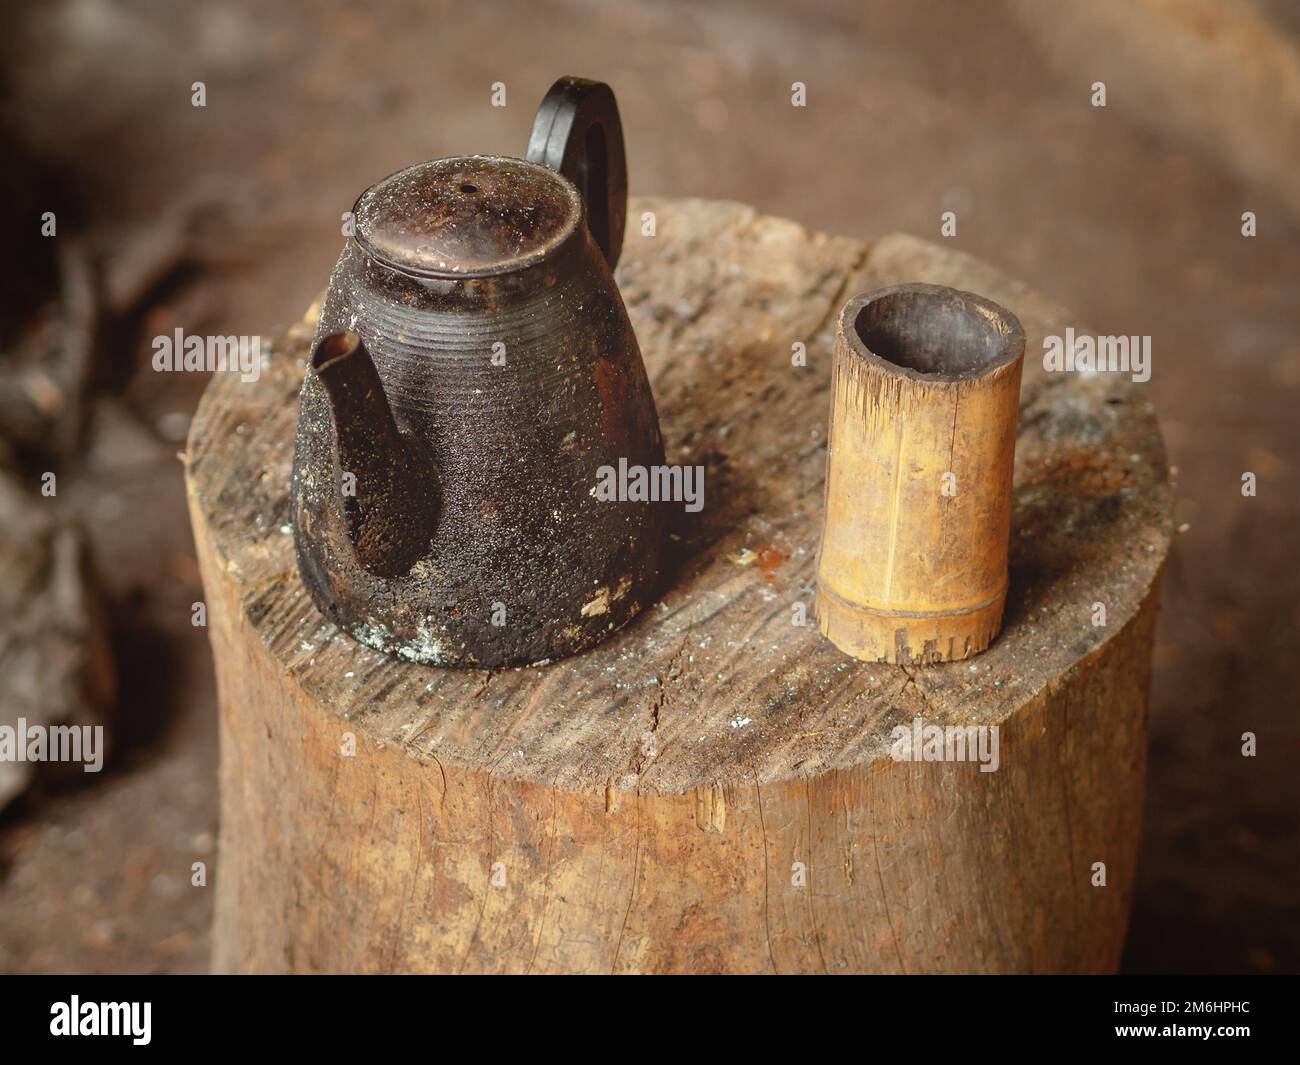 An old charred kettle with a homemade mug carved out of wood stands on a log. Tea drinking in field conditions Stock Photo